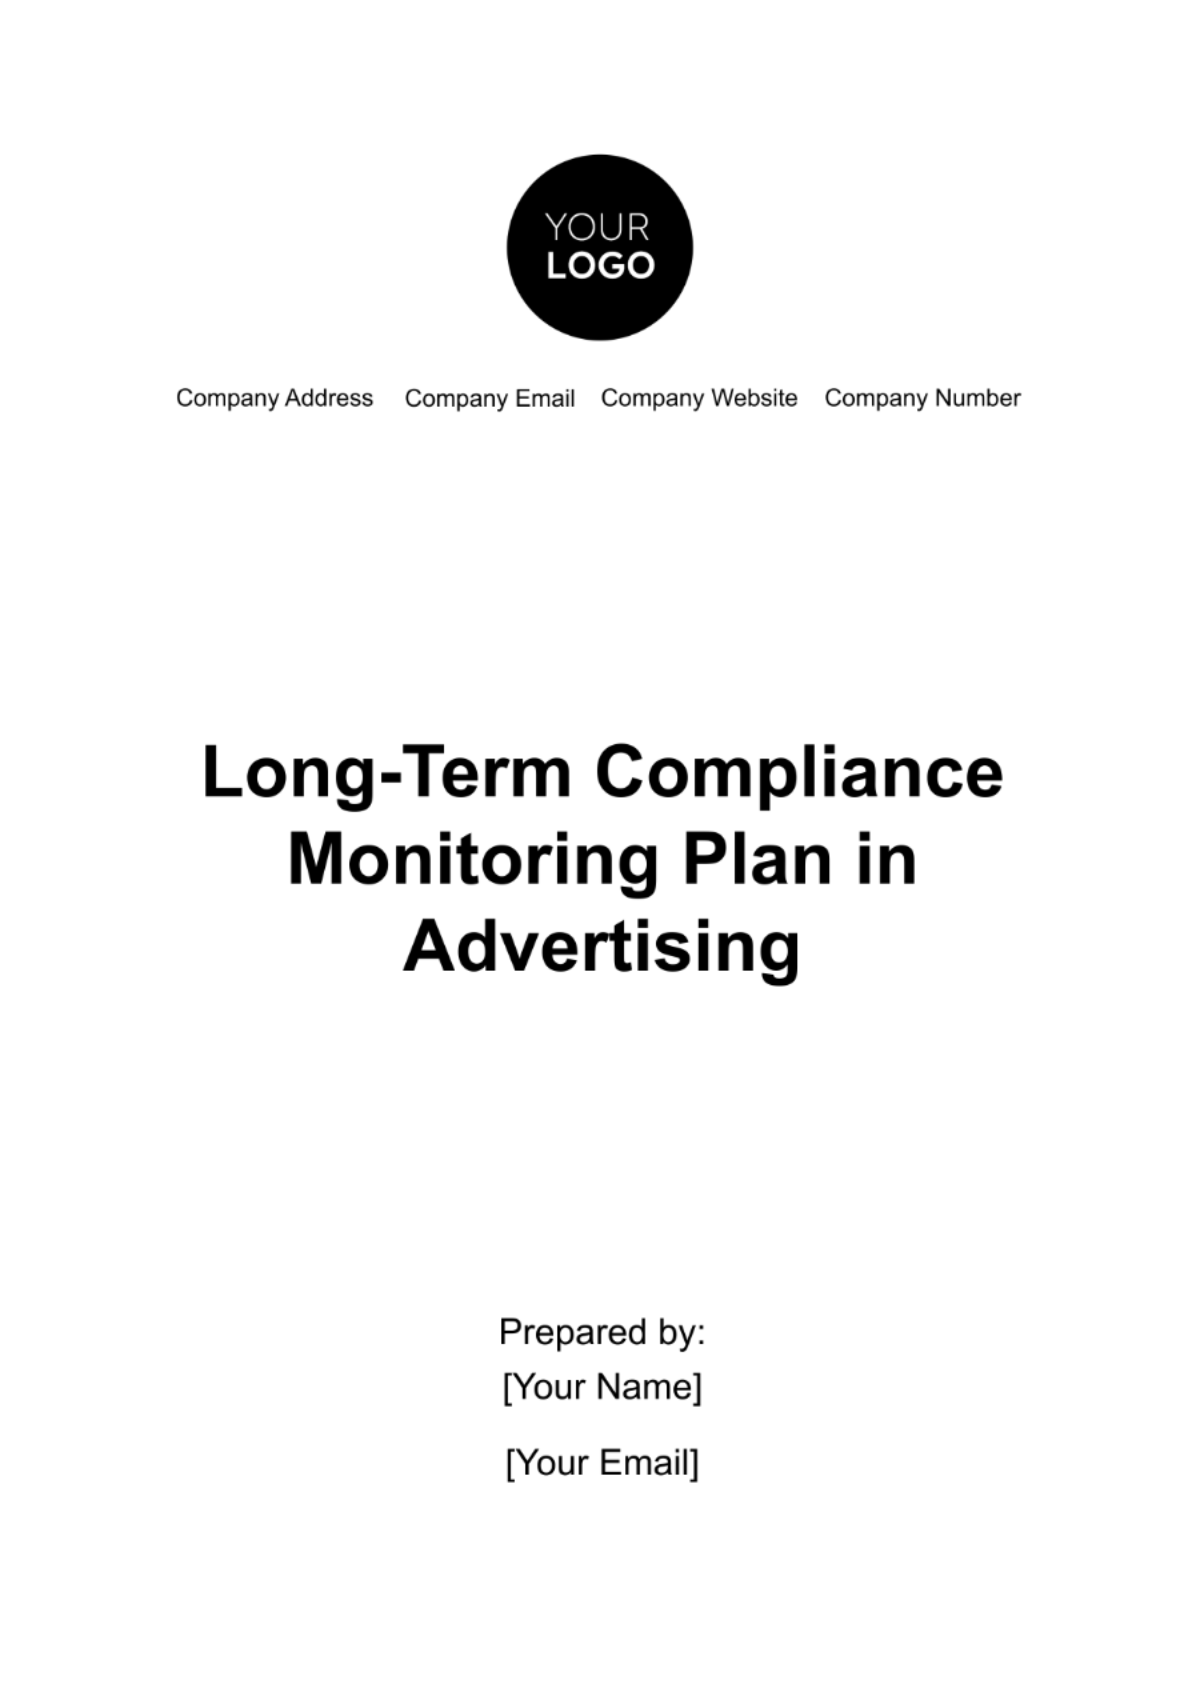 Long-Term Compliance Monitoring Plan in Advertising Template